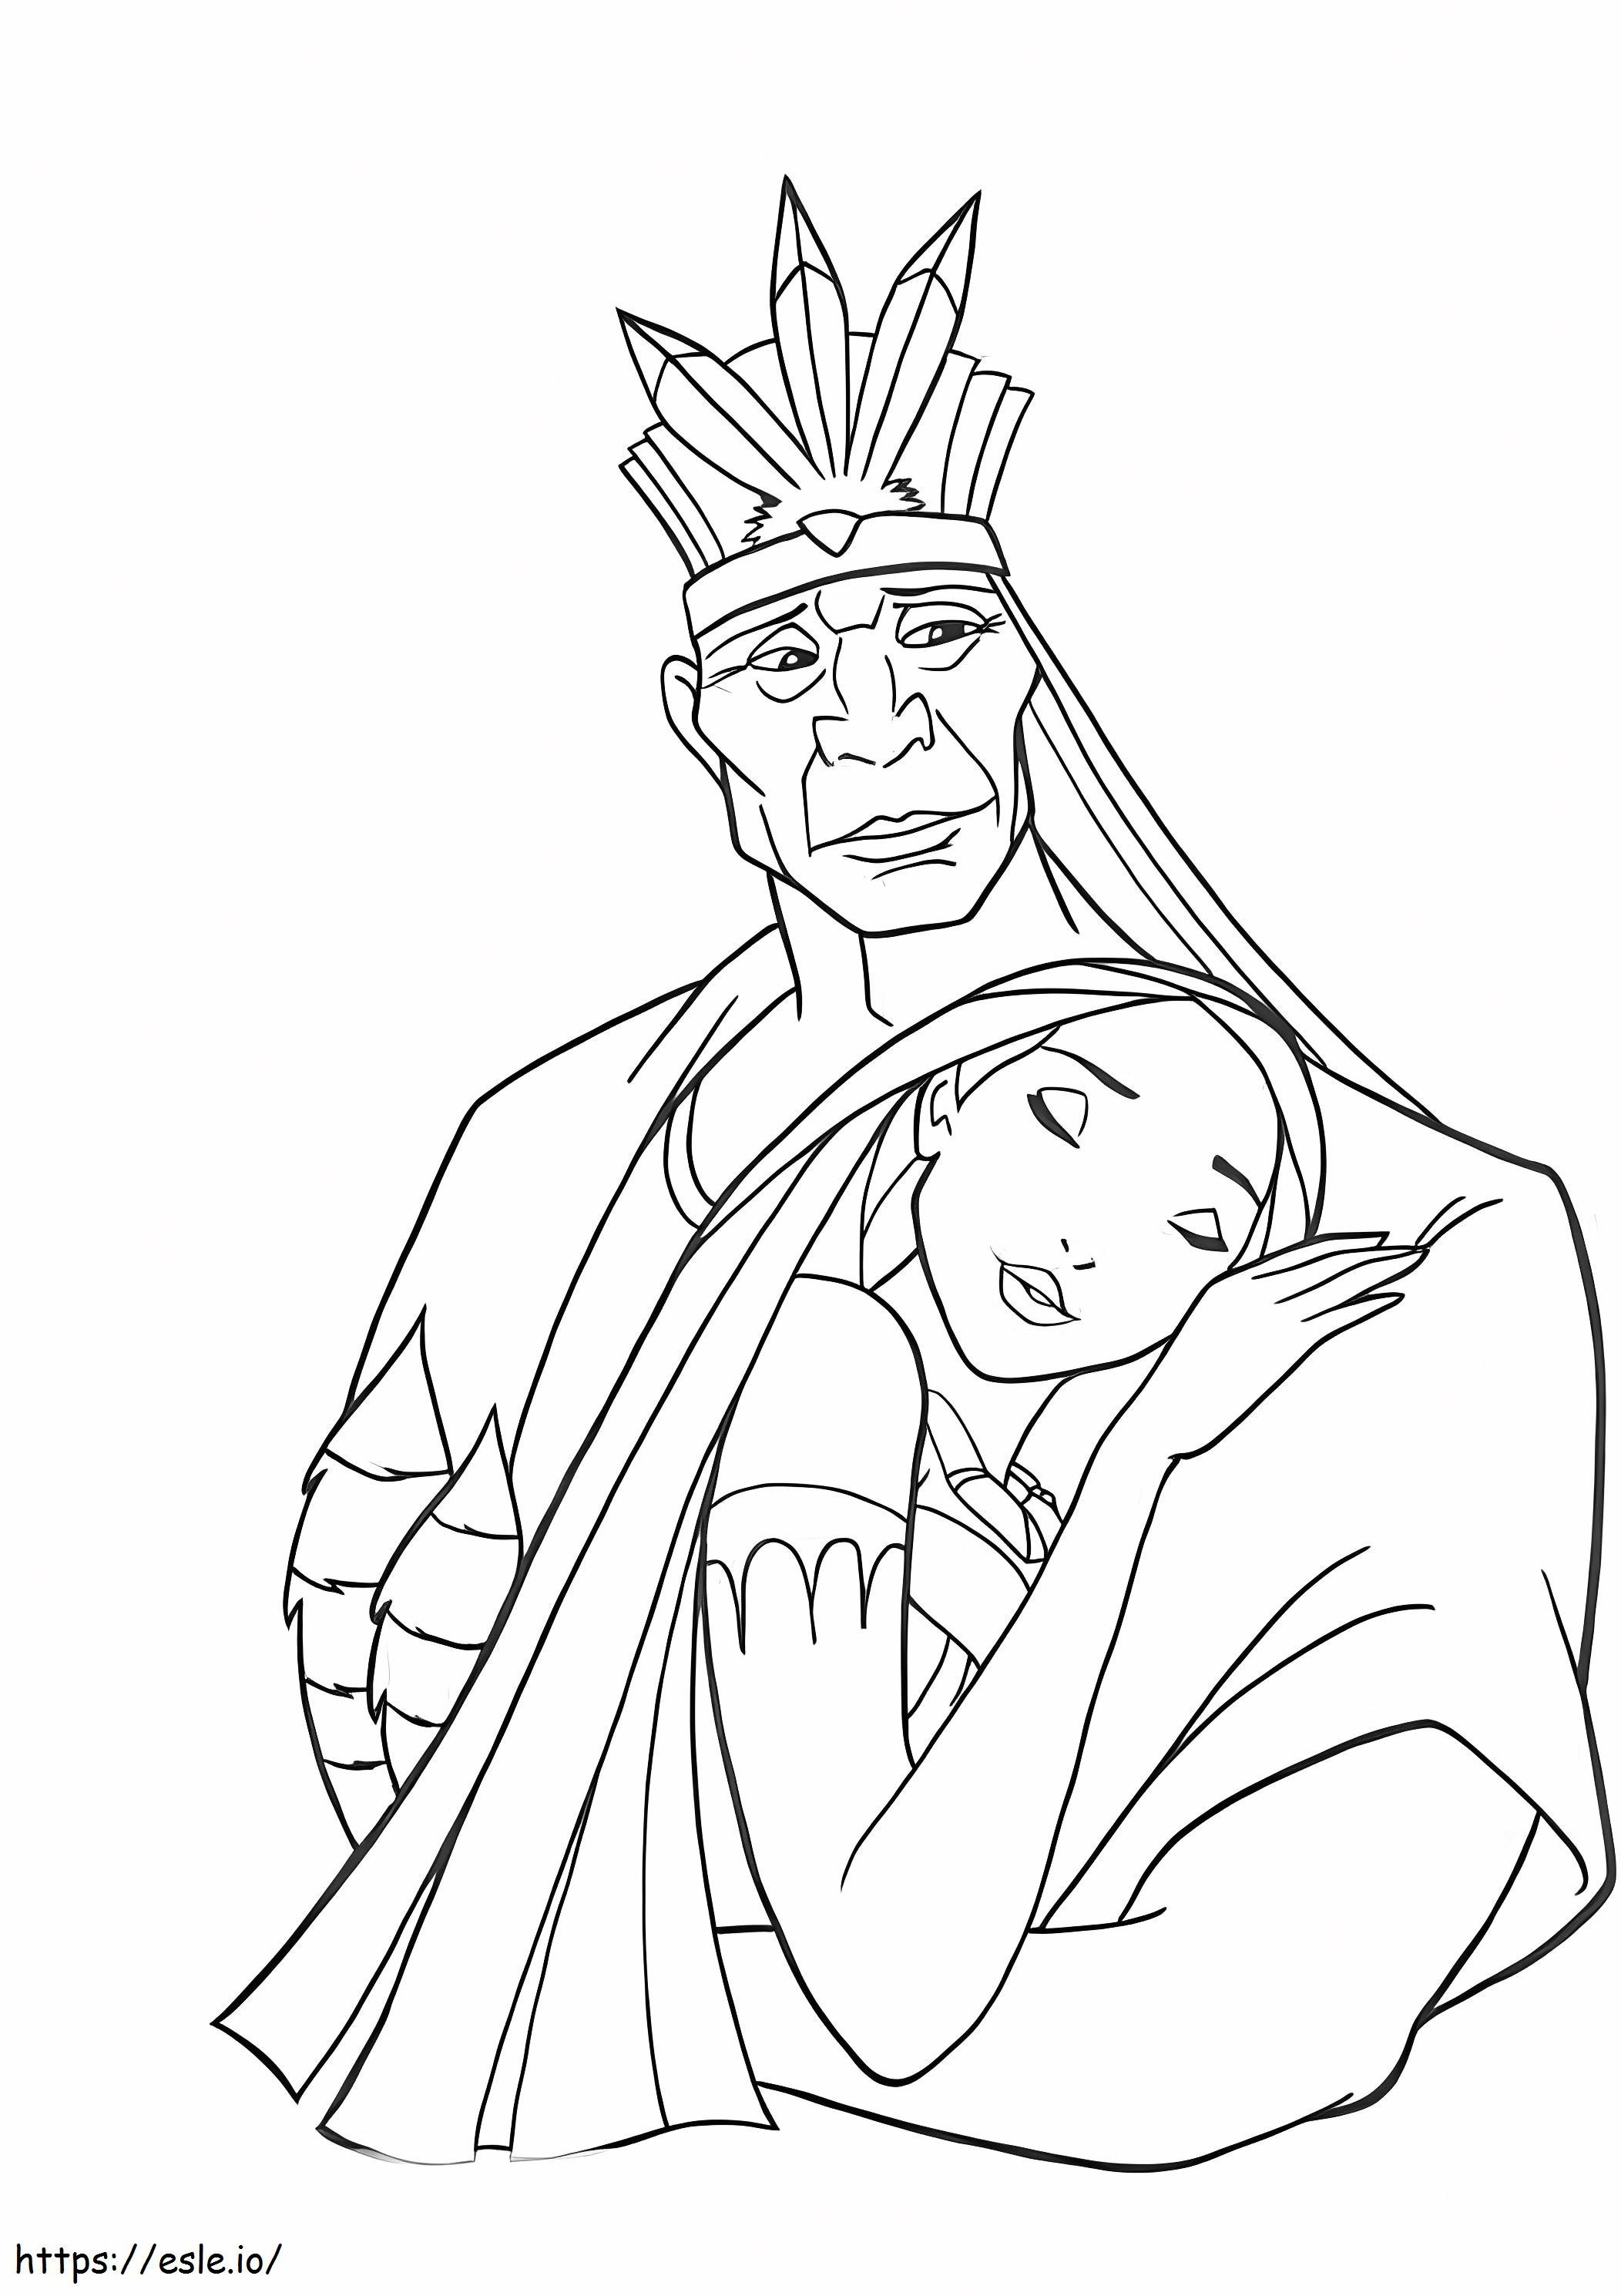 1561796450 Pocahontas And Her Father A4 coloring page